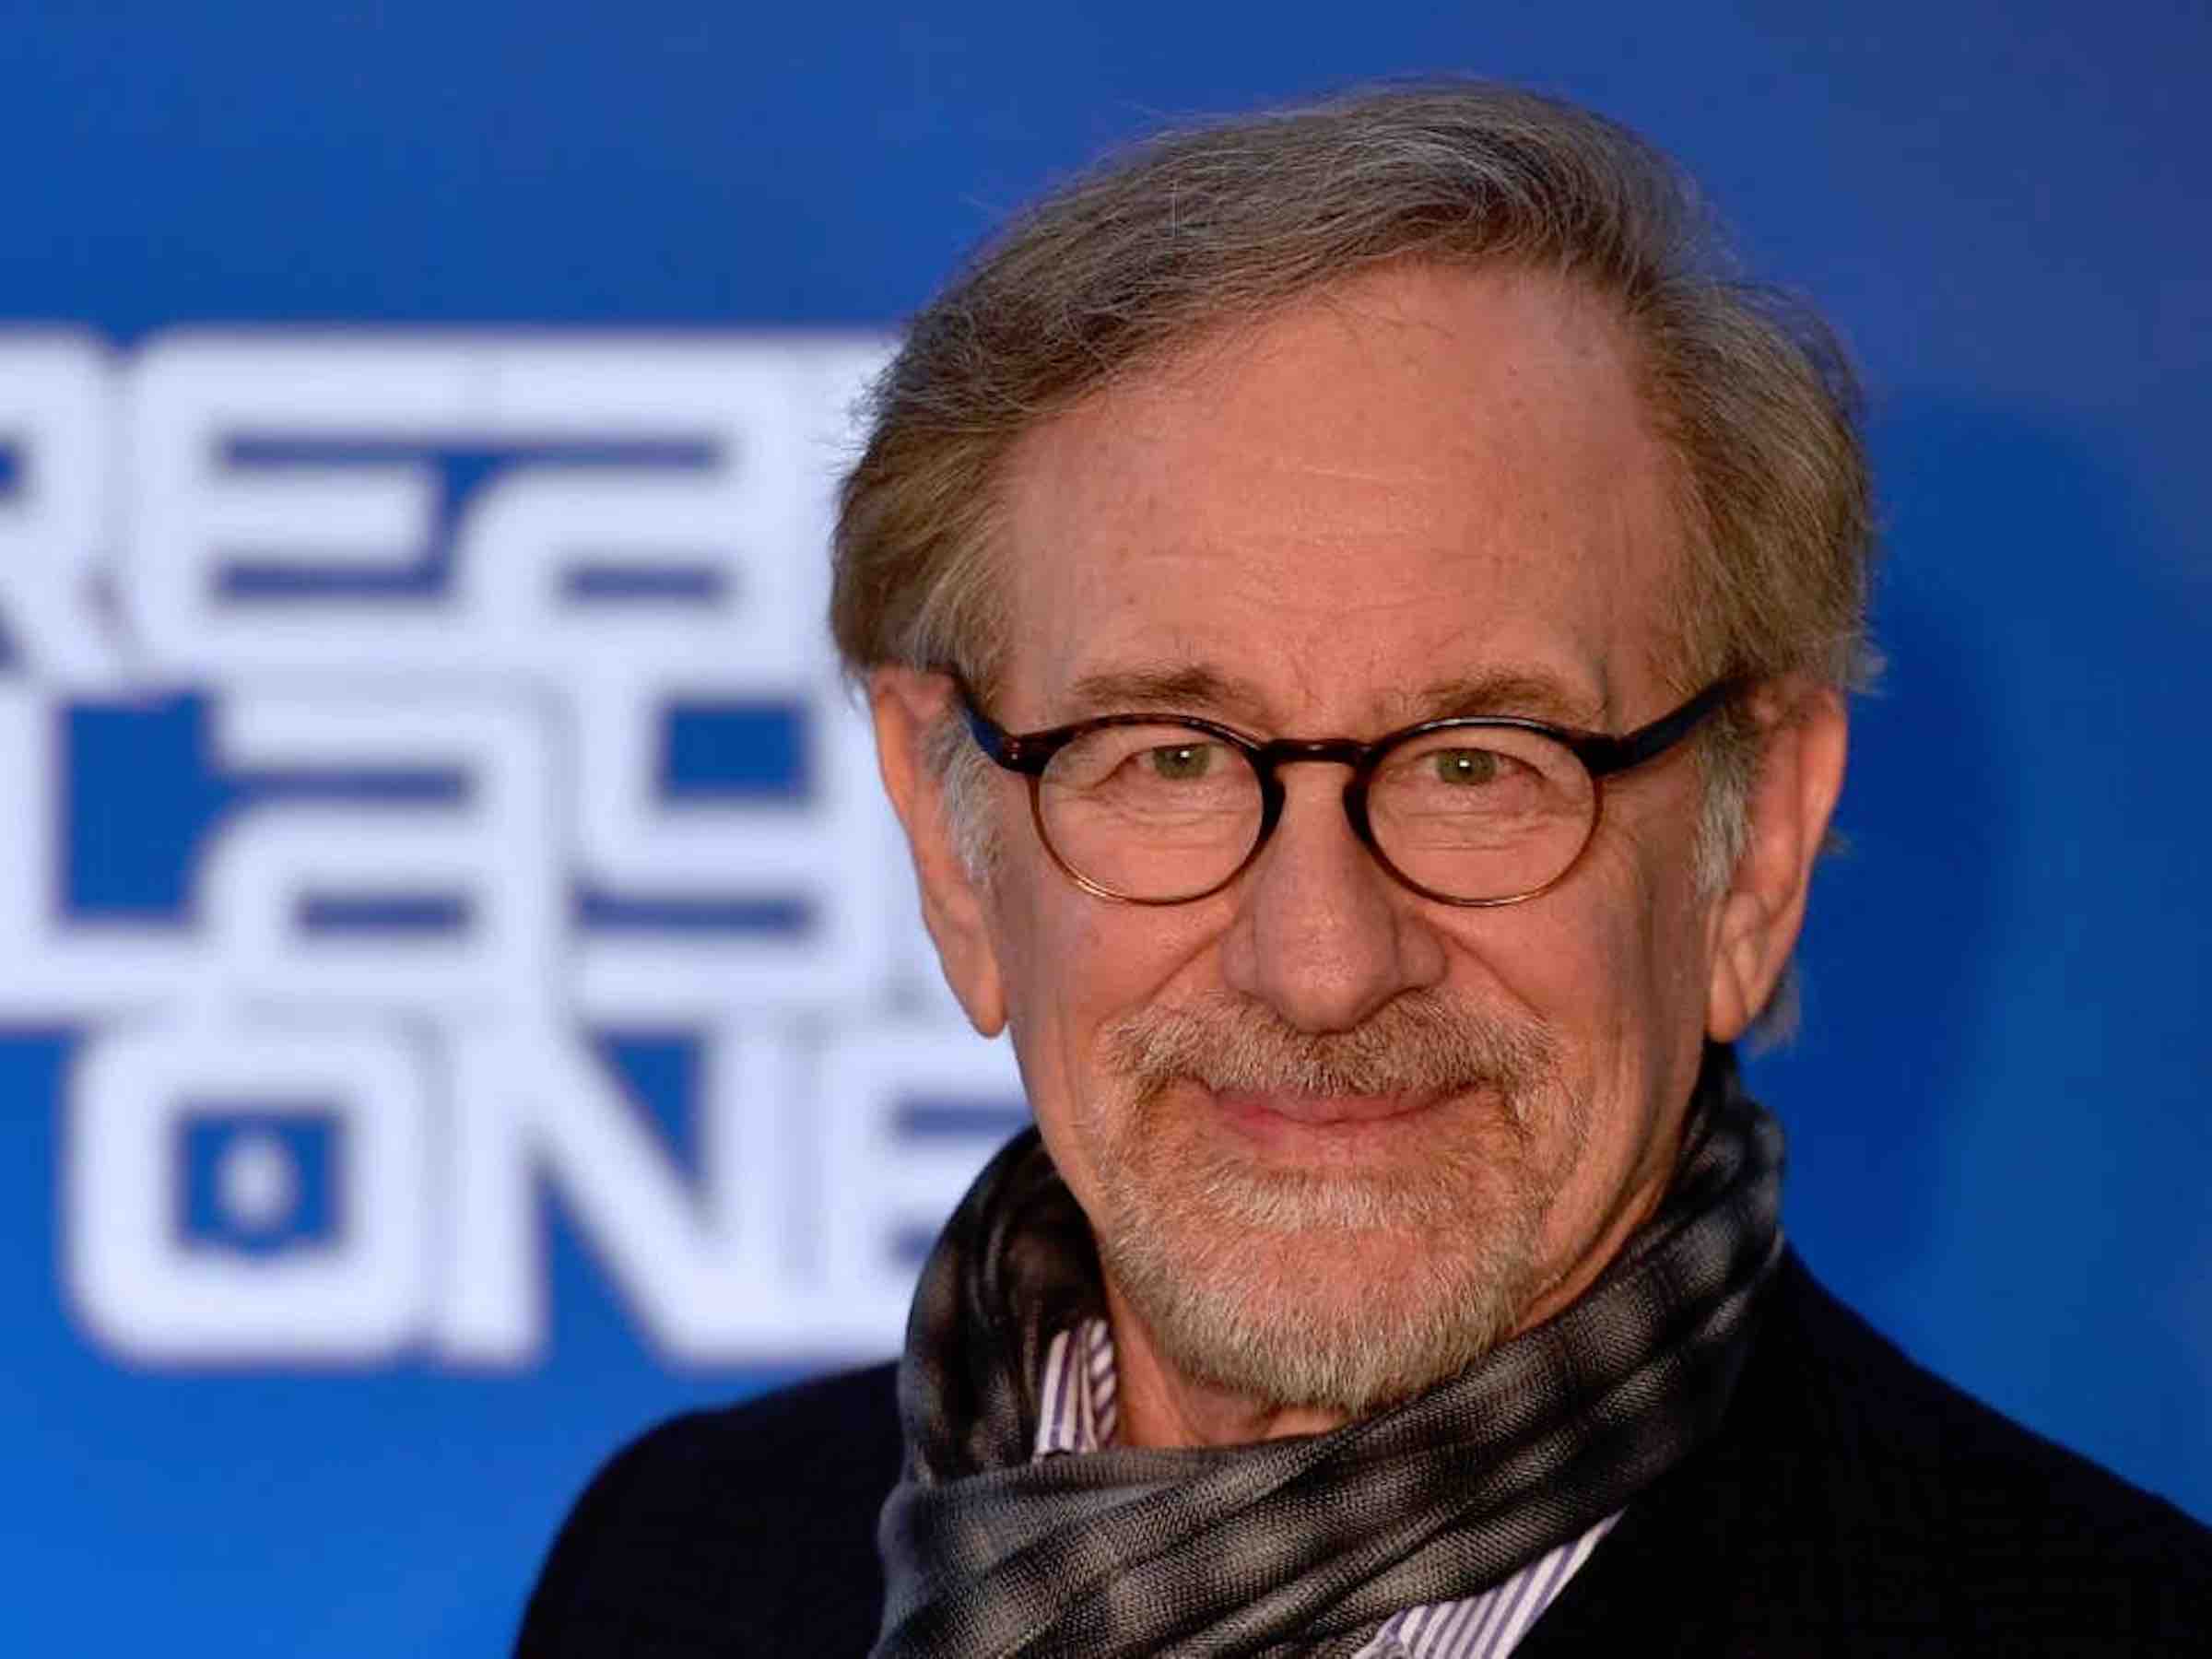 We’re here to celebrate the Steven Spielberg movies that were pretty awful. Even the King of Hollywood can flounder sometimes.